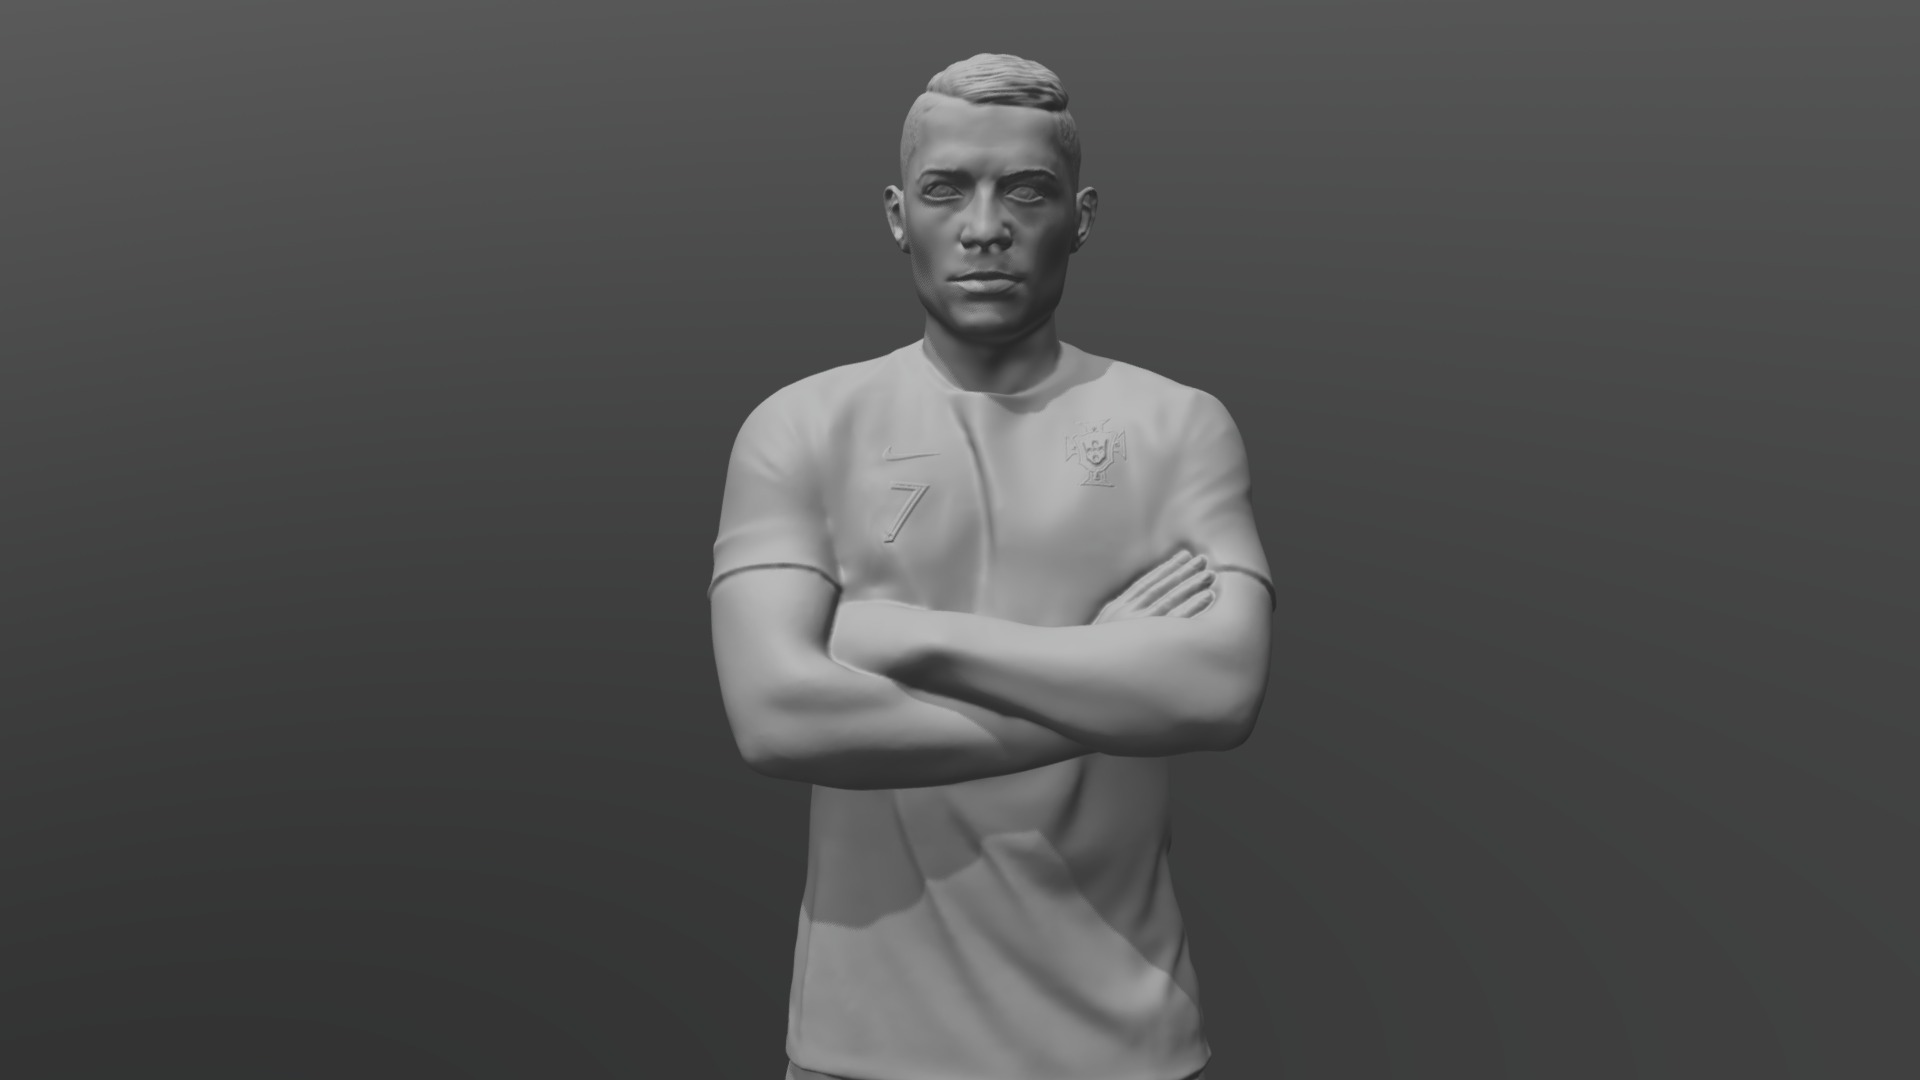 3D model Cristiano Ronaldo ready for 3D printing - This is a 3D model of the Cristiano Ronaldo ready for 3D printing. The 3D model is about a person with the arms crossed.